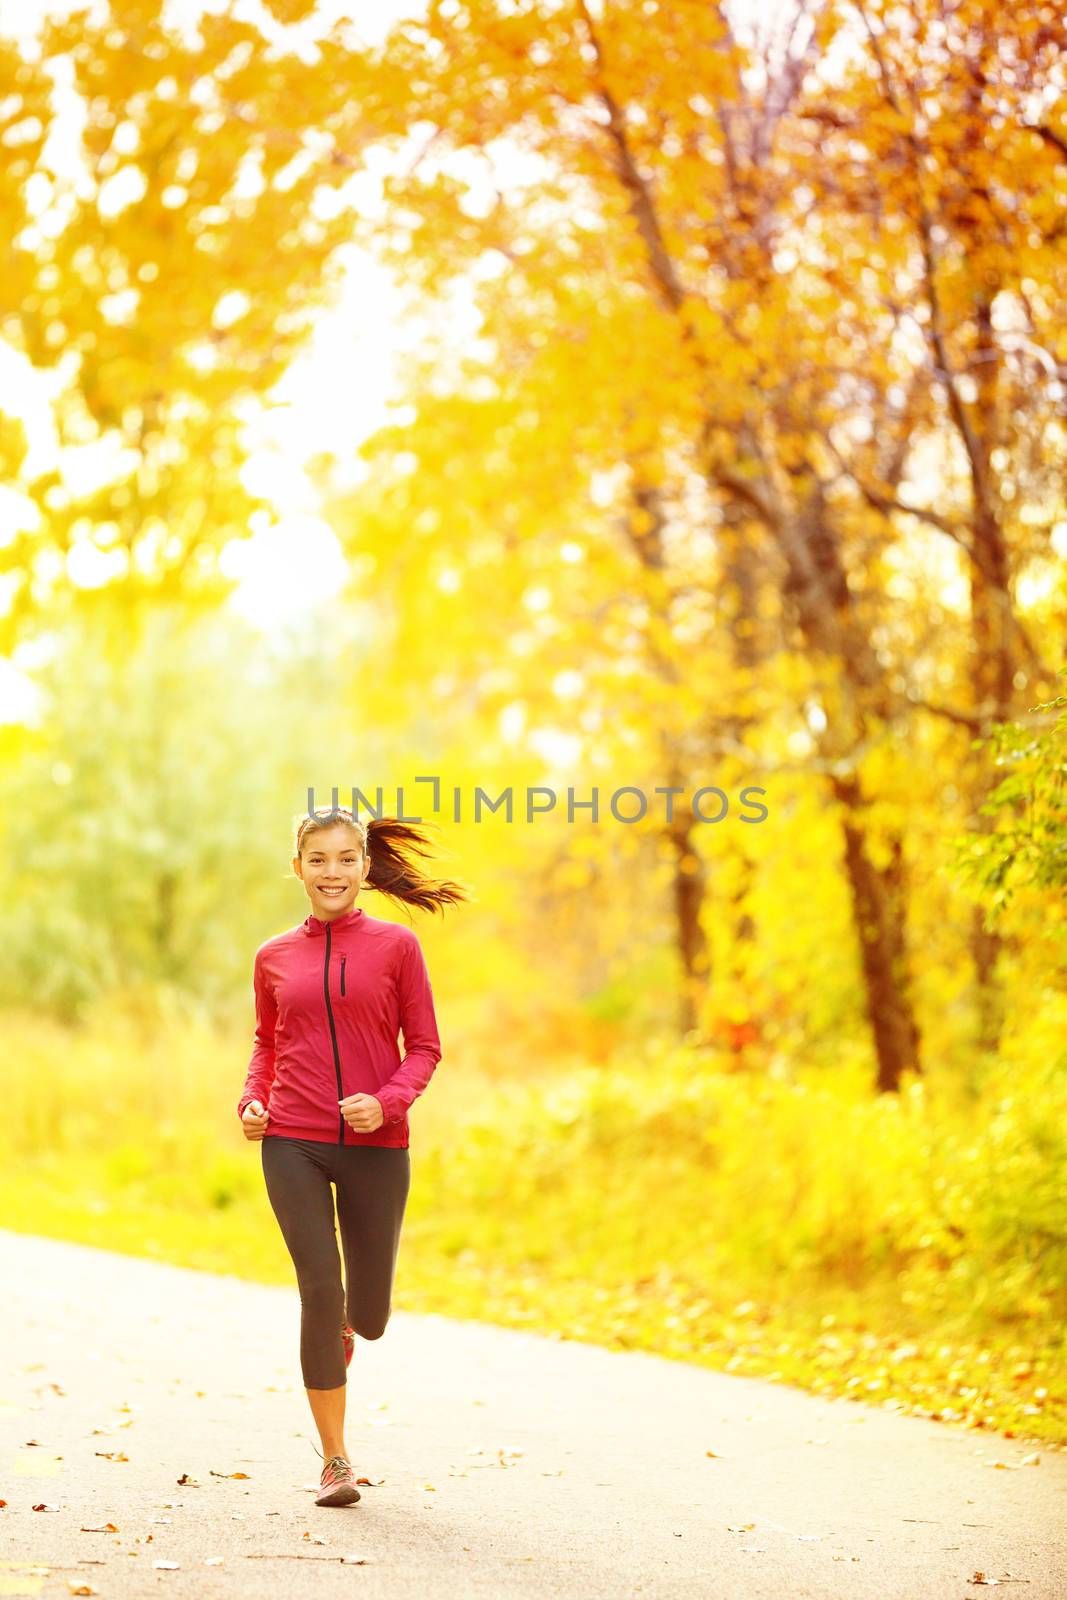 Athlete runner woman running in fall autumn forest. Female fitness girl jogging on path in amazing fall foliage landscape nature outside.